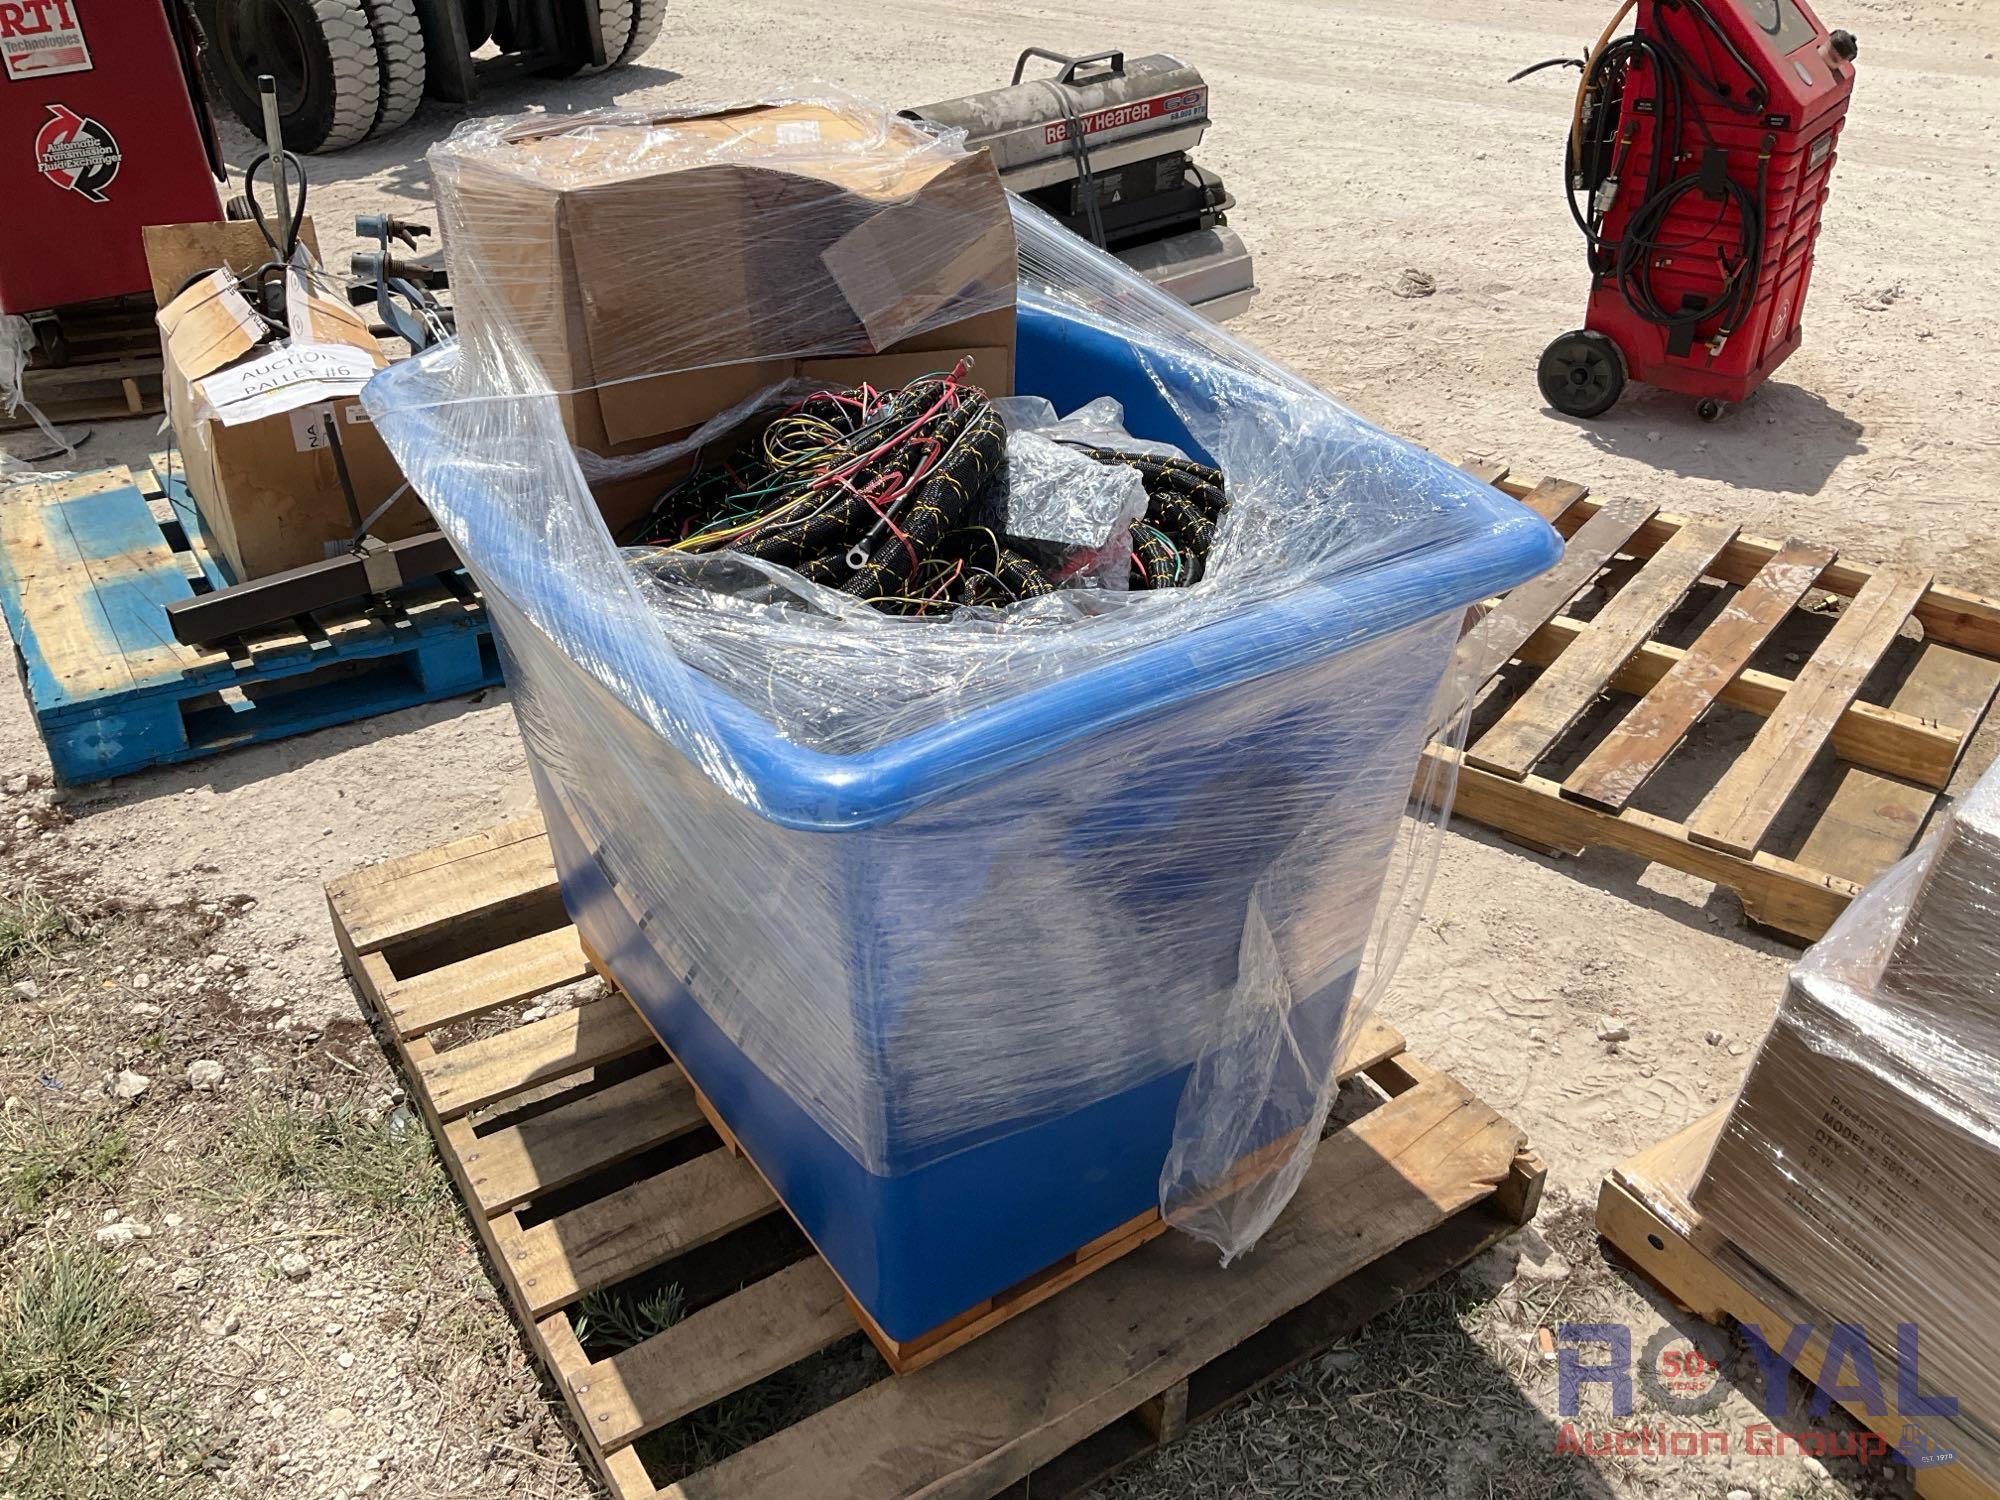 Pallet of Miscellaneous Wires